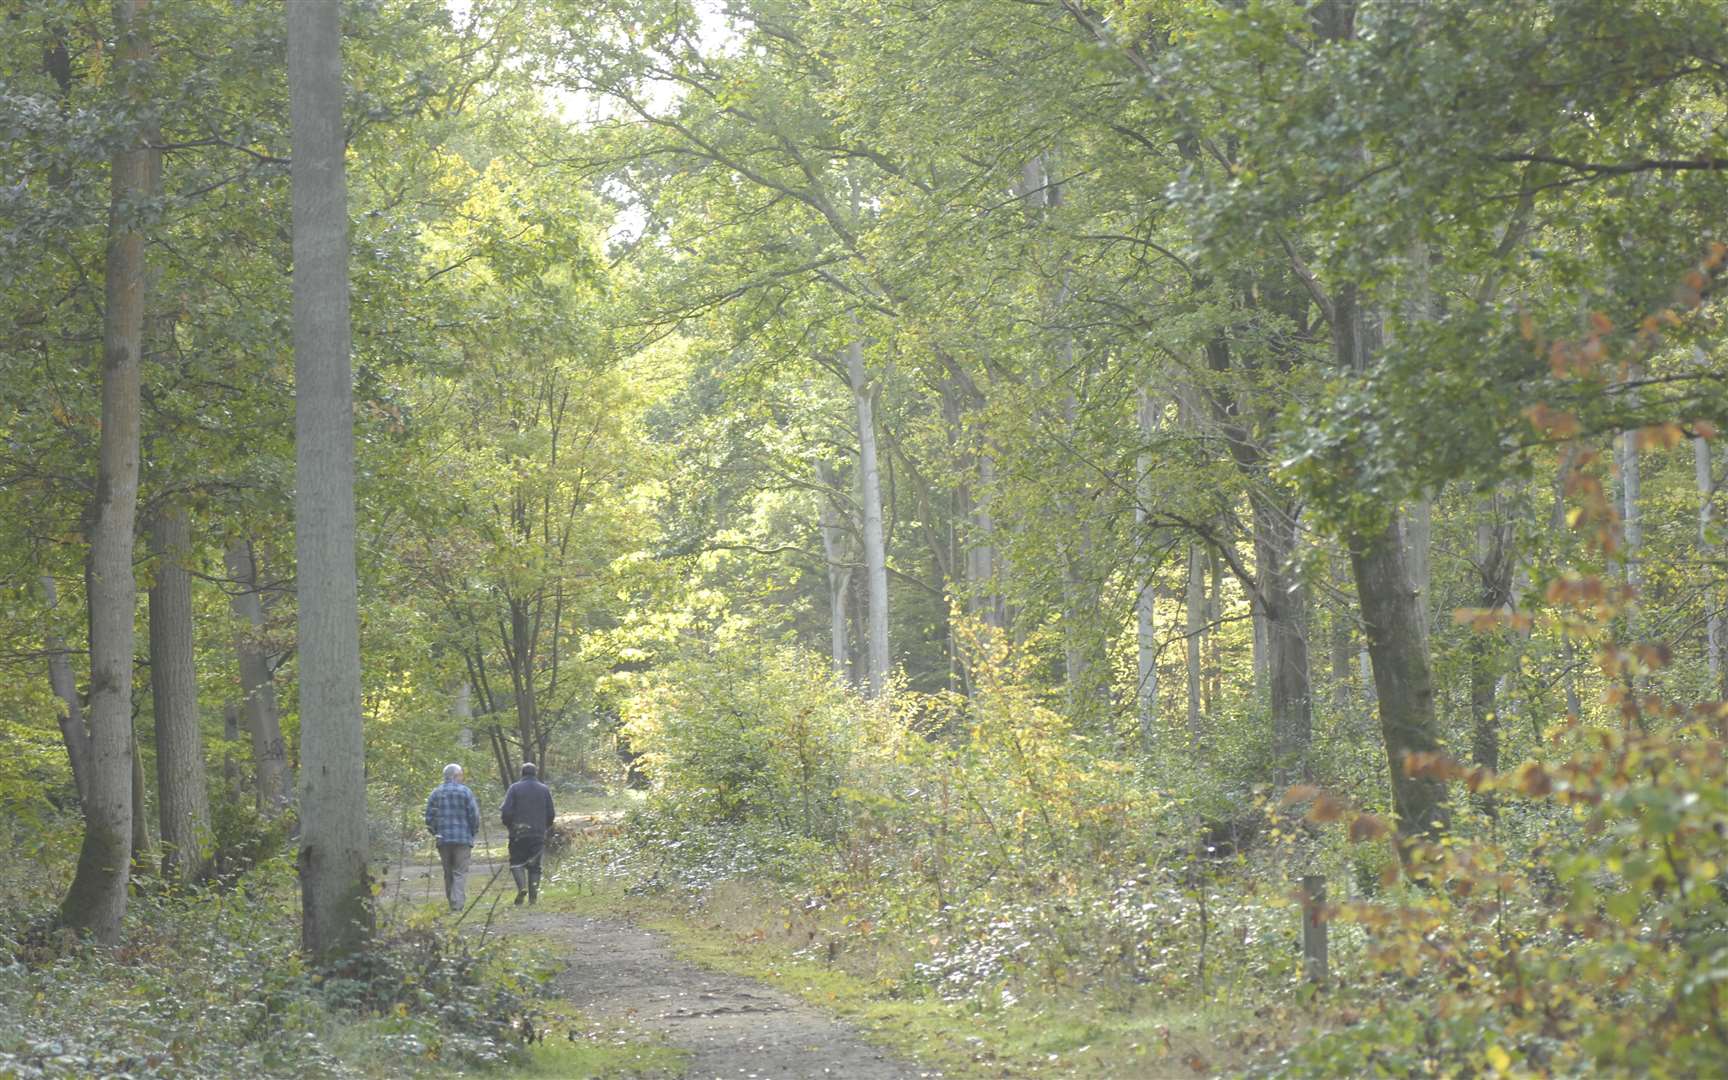 The woodland is popular with walkers